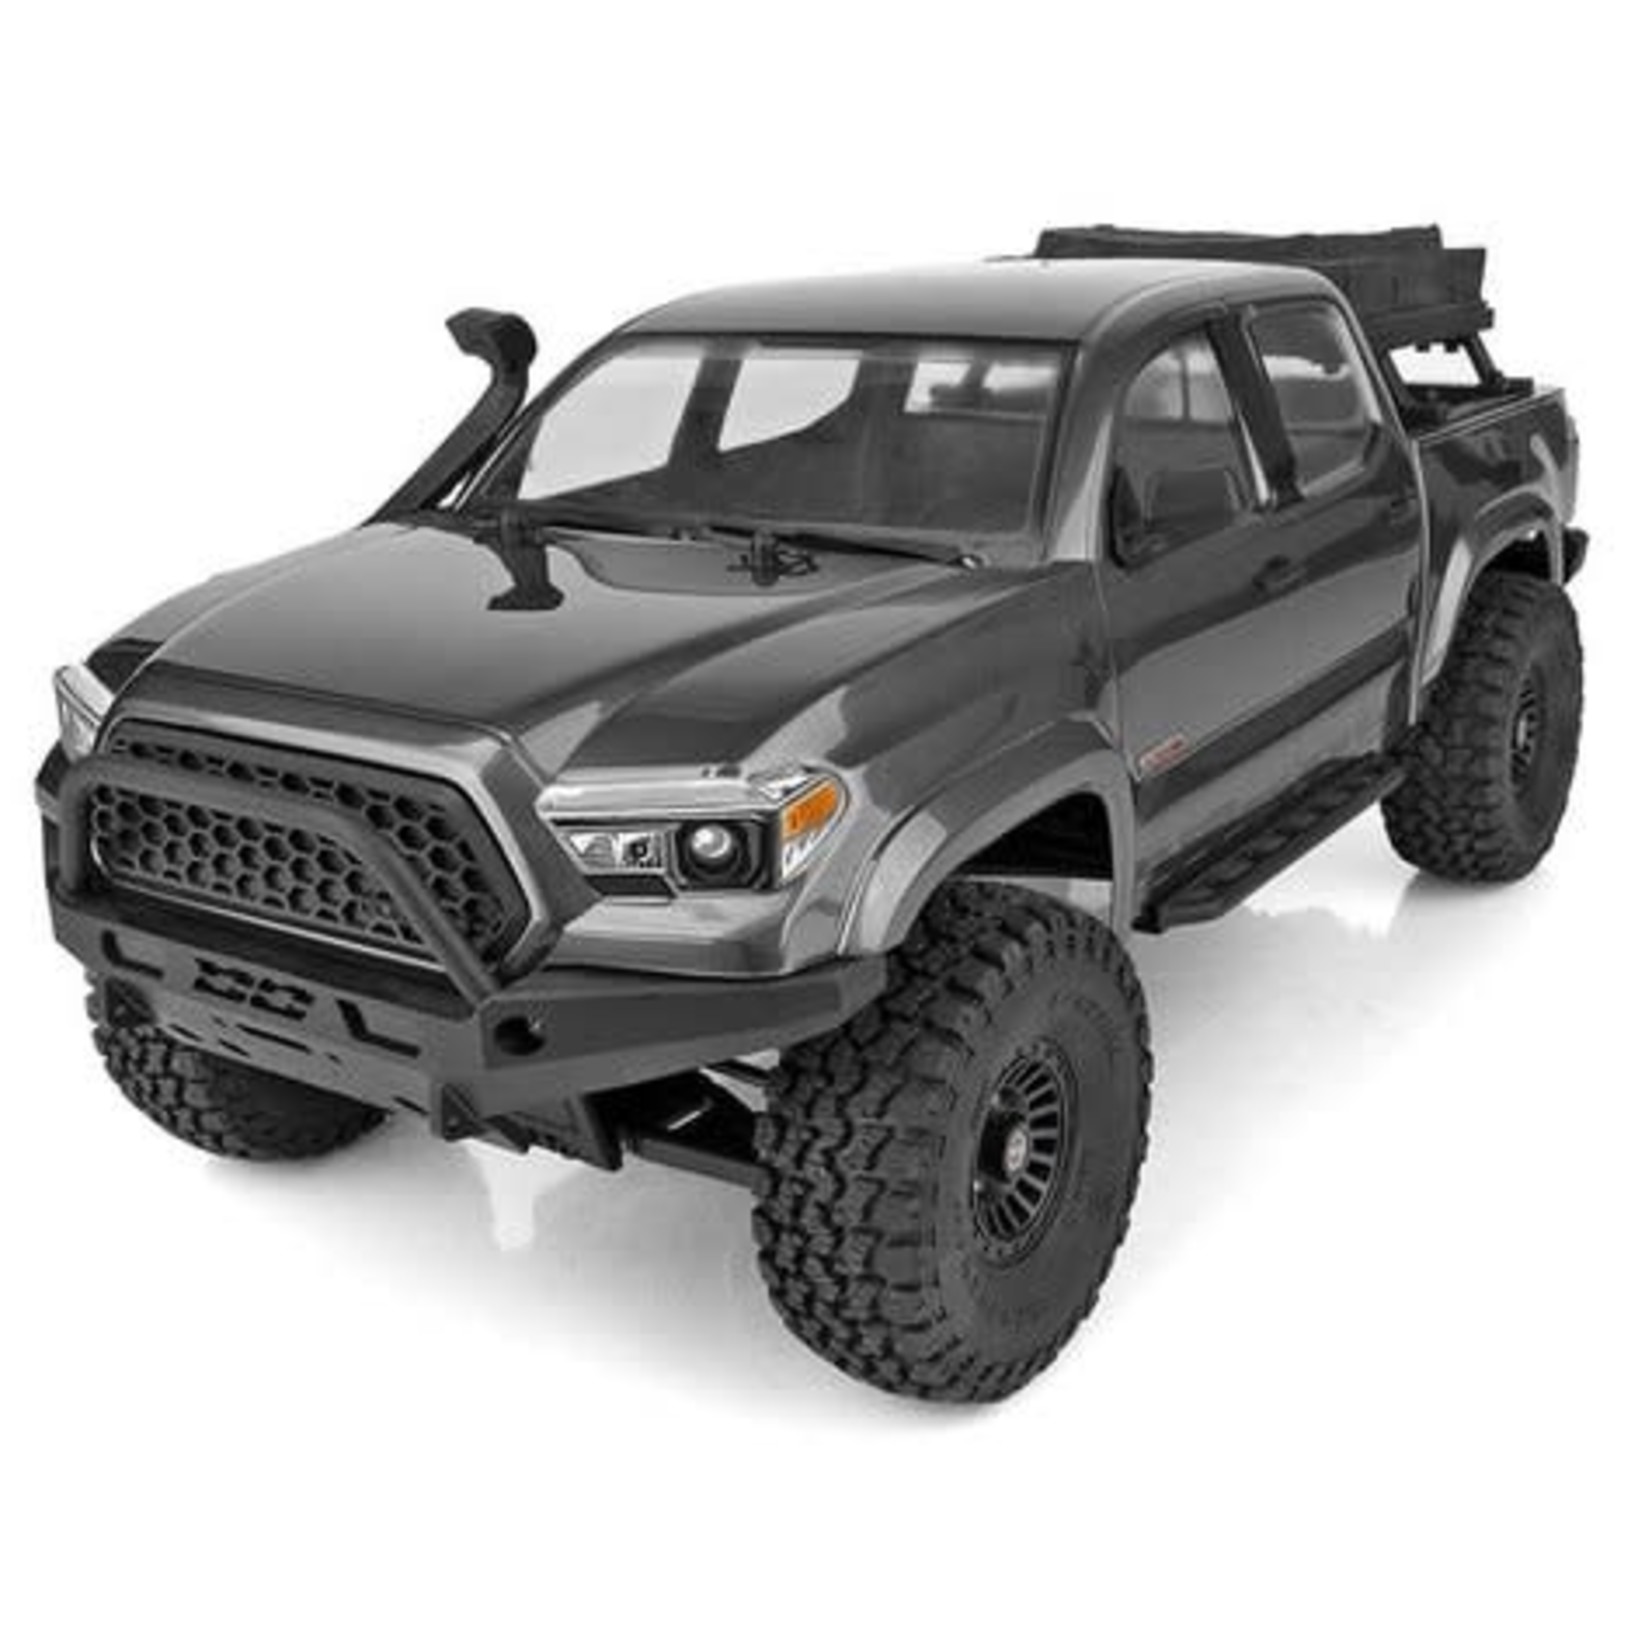 Element RC Element RC Enduro Knightrunner 4x4 RTR 1/10 Rock Crawler Combo w/2.4GHz Radio, Battery & Charger #40113C